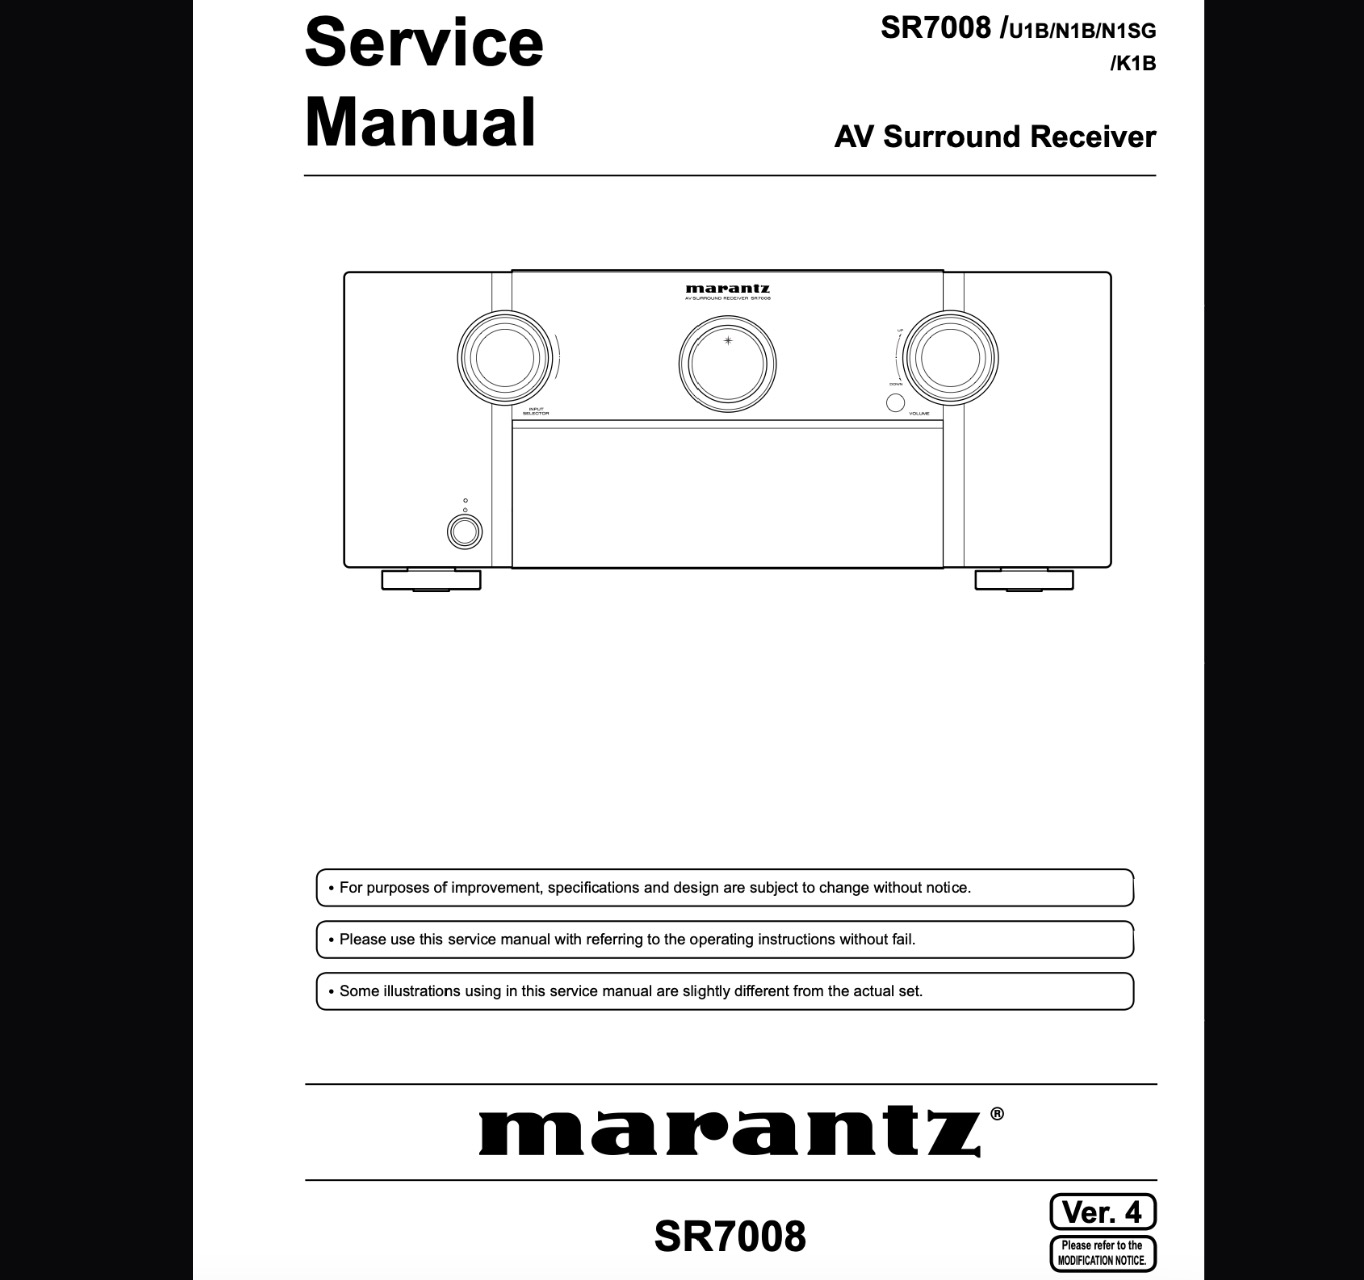 Marantz SR7008 AV Surround Receiver Service Manual, Parts List, Exploded View, Wiring and Schematic Diagram